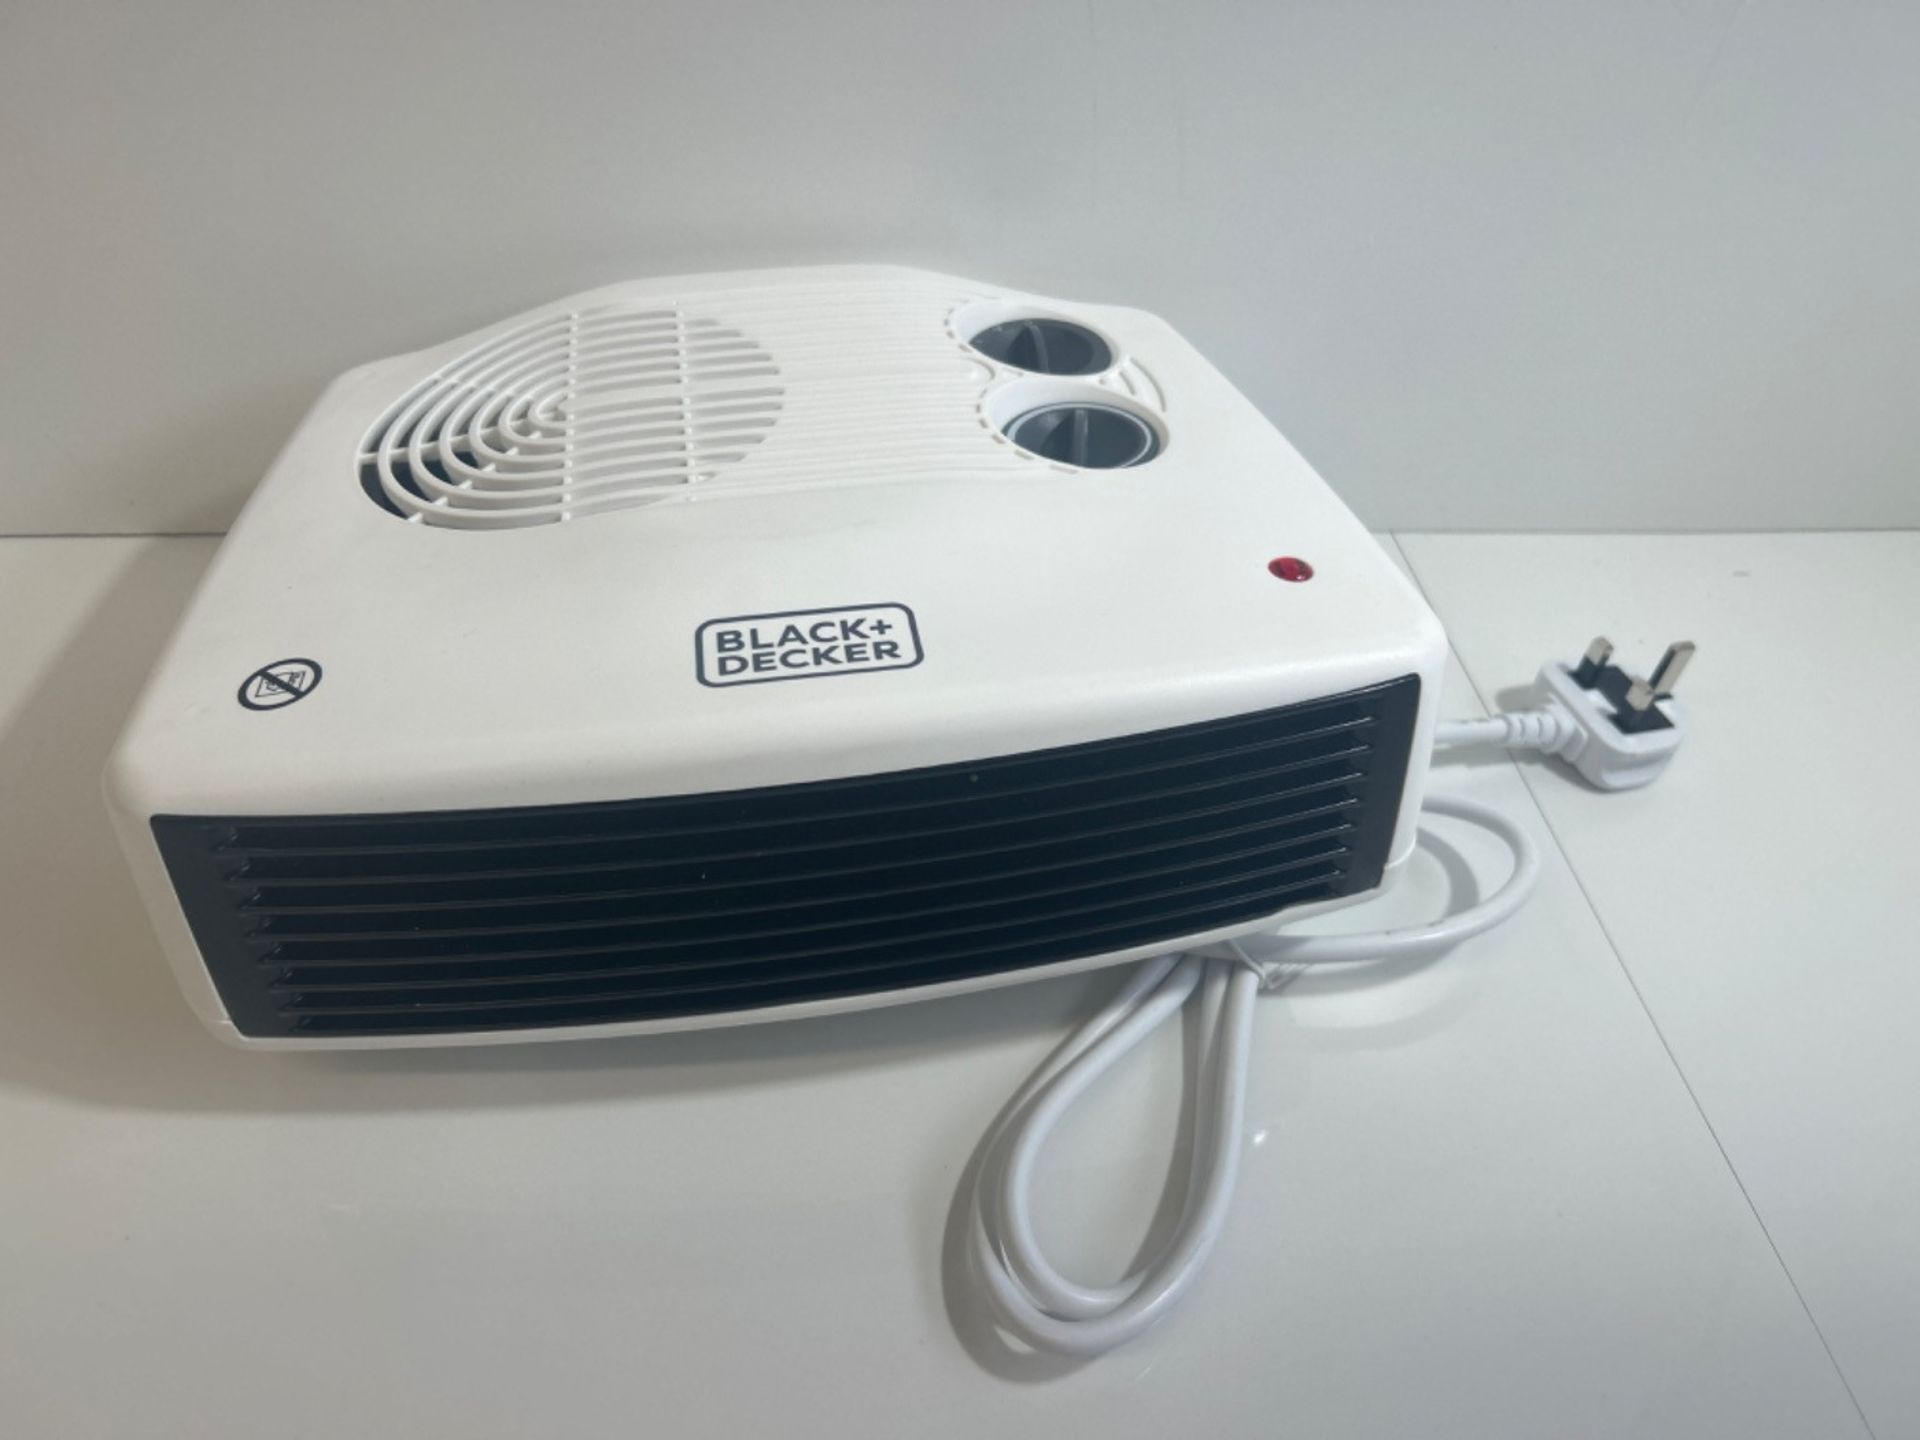 Black+Decker BXSH37006GB Fan Heater With Climate Control, 3Kw, White - Image 2 of 3